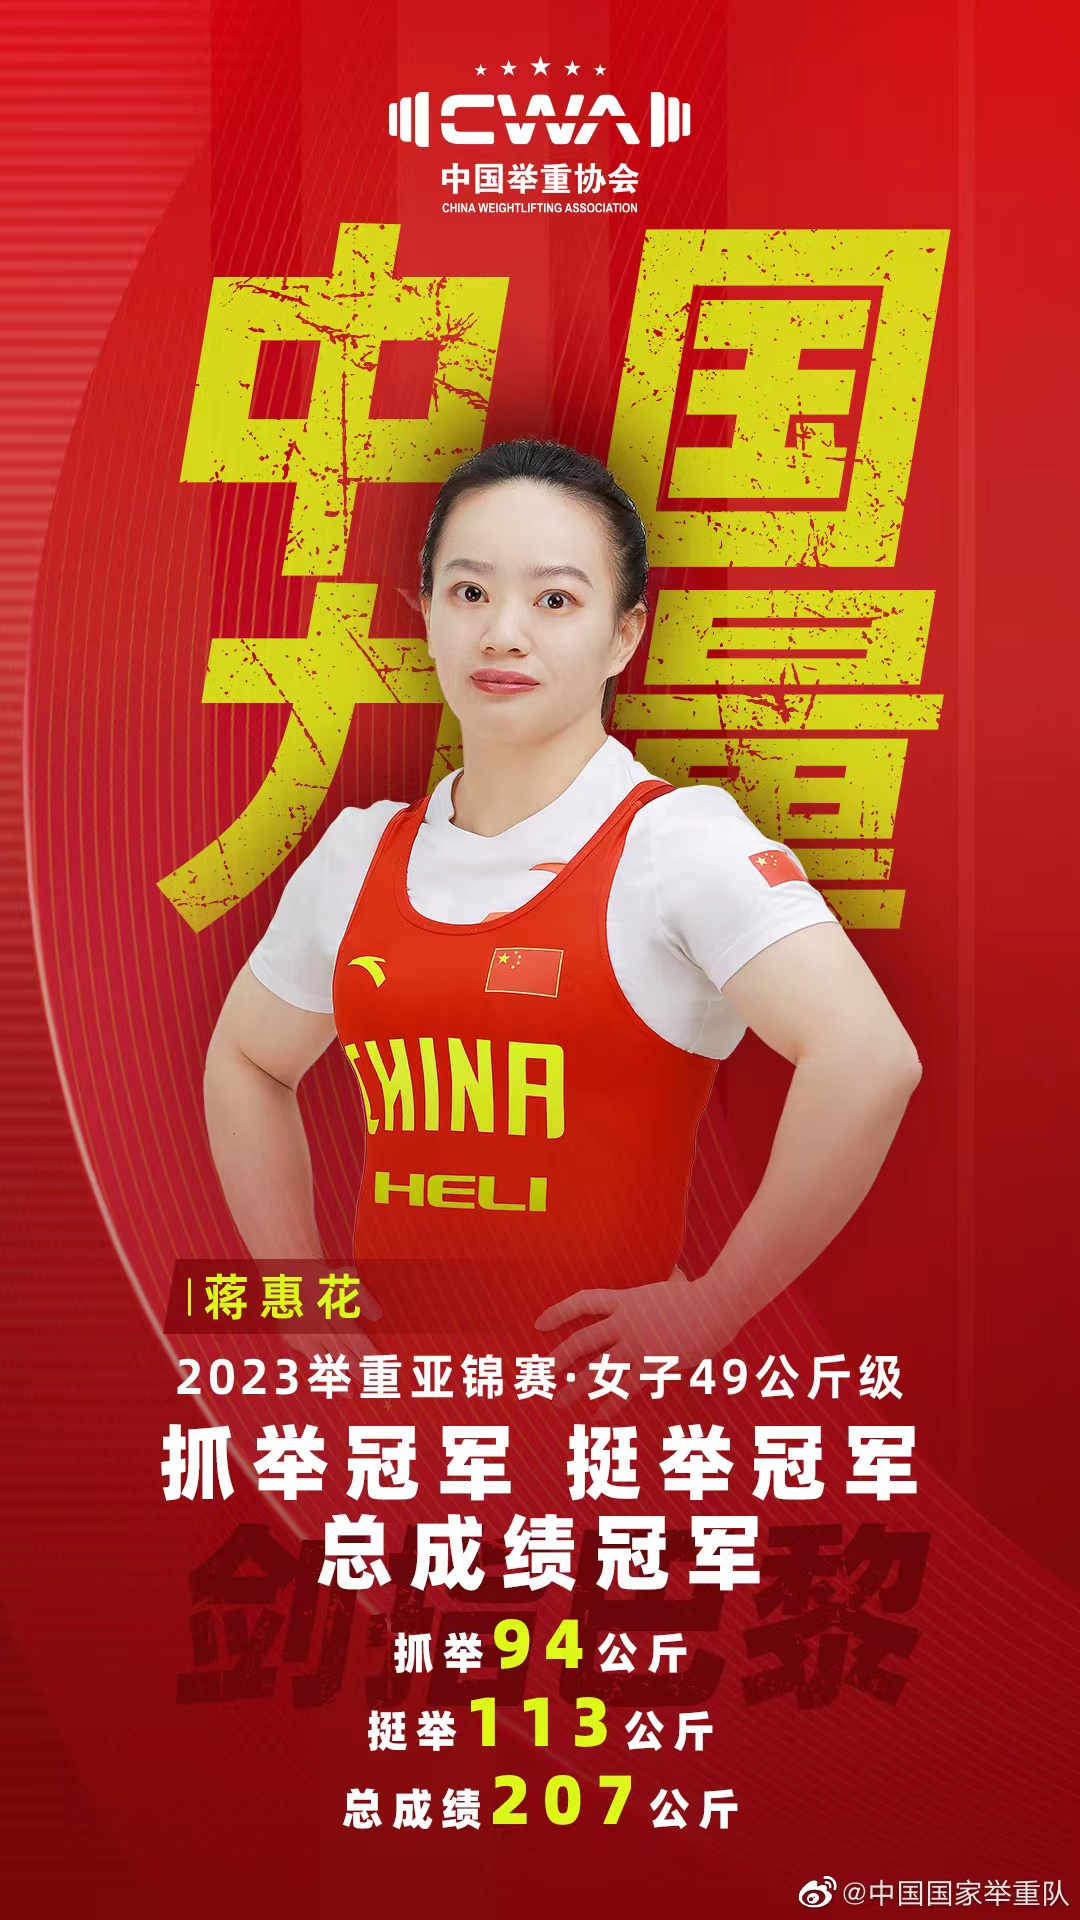 Chinese national weightlifting team's Weibo poster on May 5 honors Jiang Huihua's three gold medals at the Asian Weightlifting Championships. /Chinese national weightlifting team 